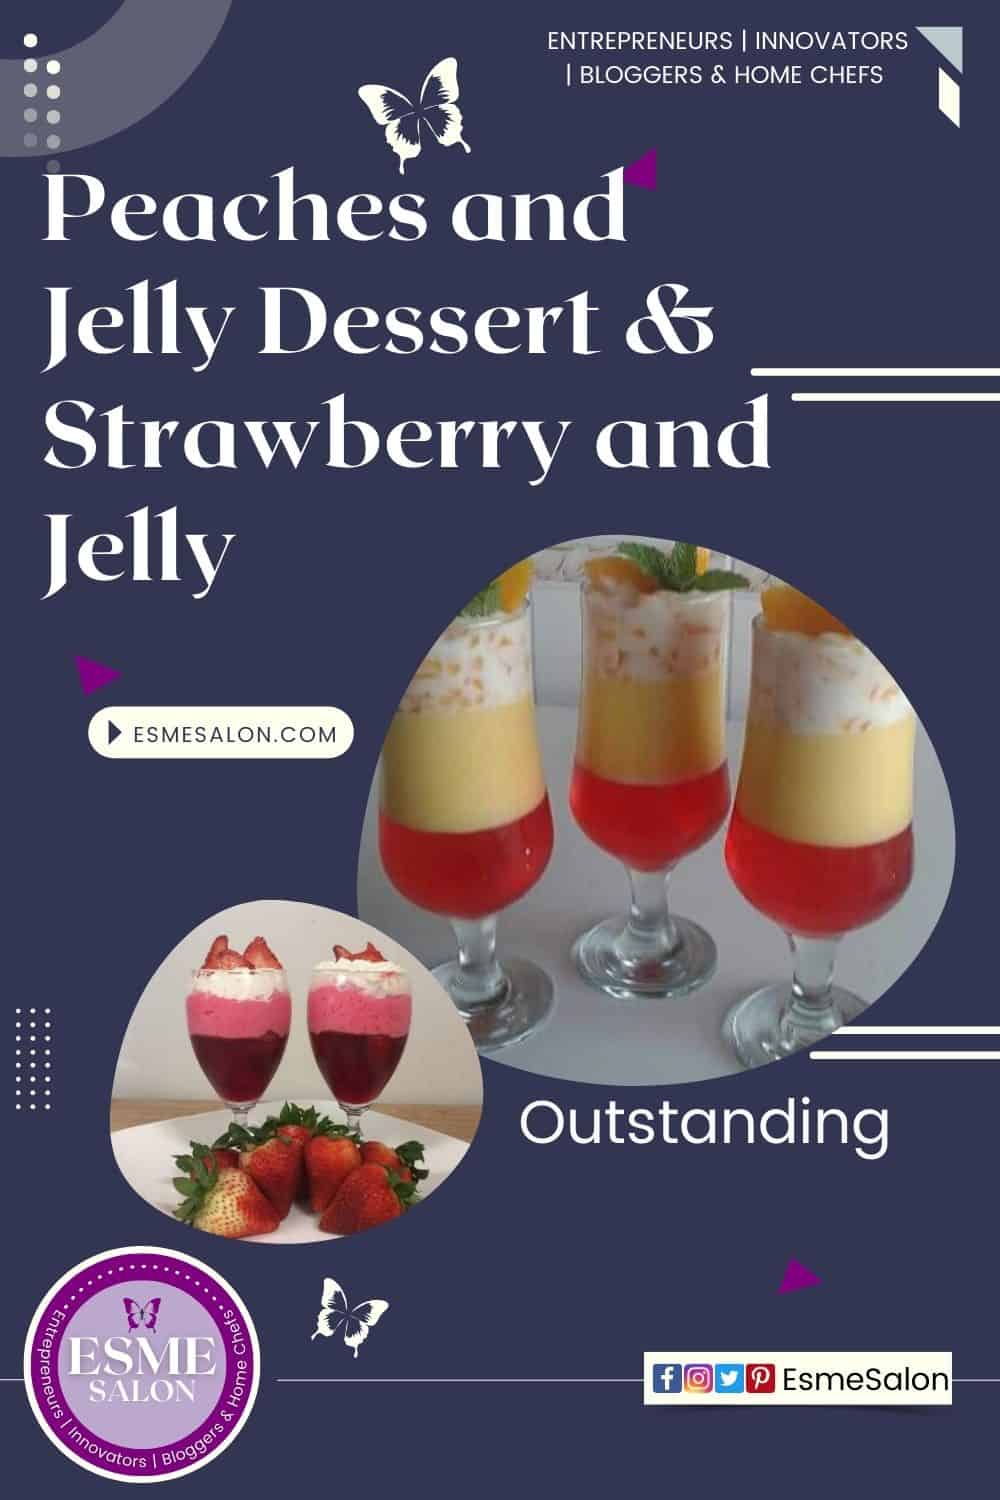 an image of long tall glasses filled with Peaches and Jelly Dessert & Strawberry and Jelly